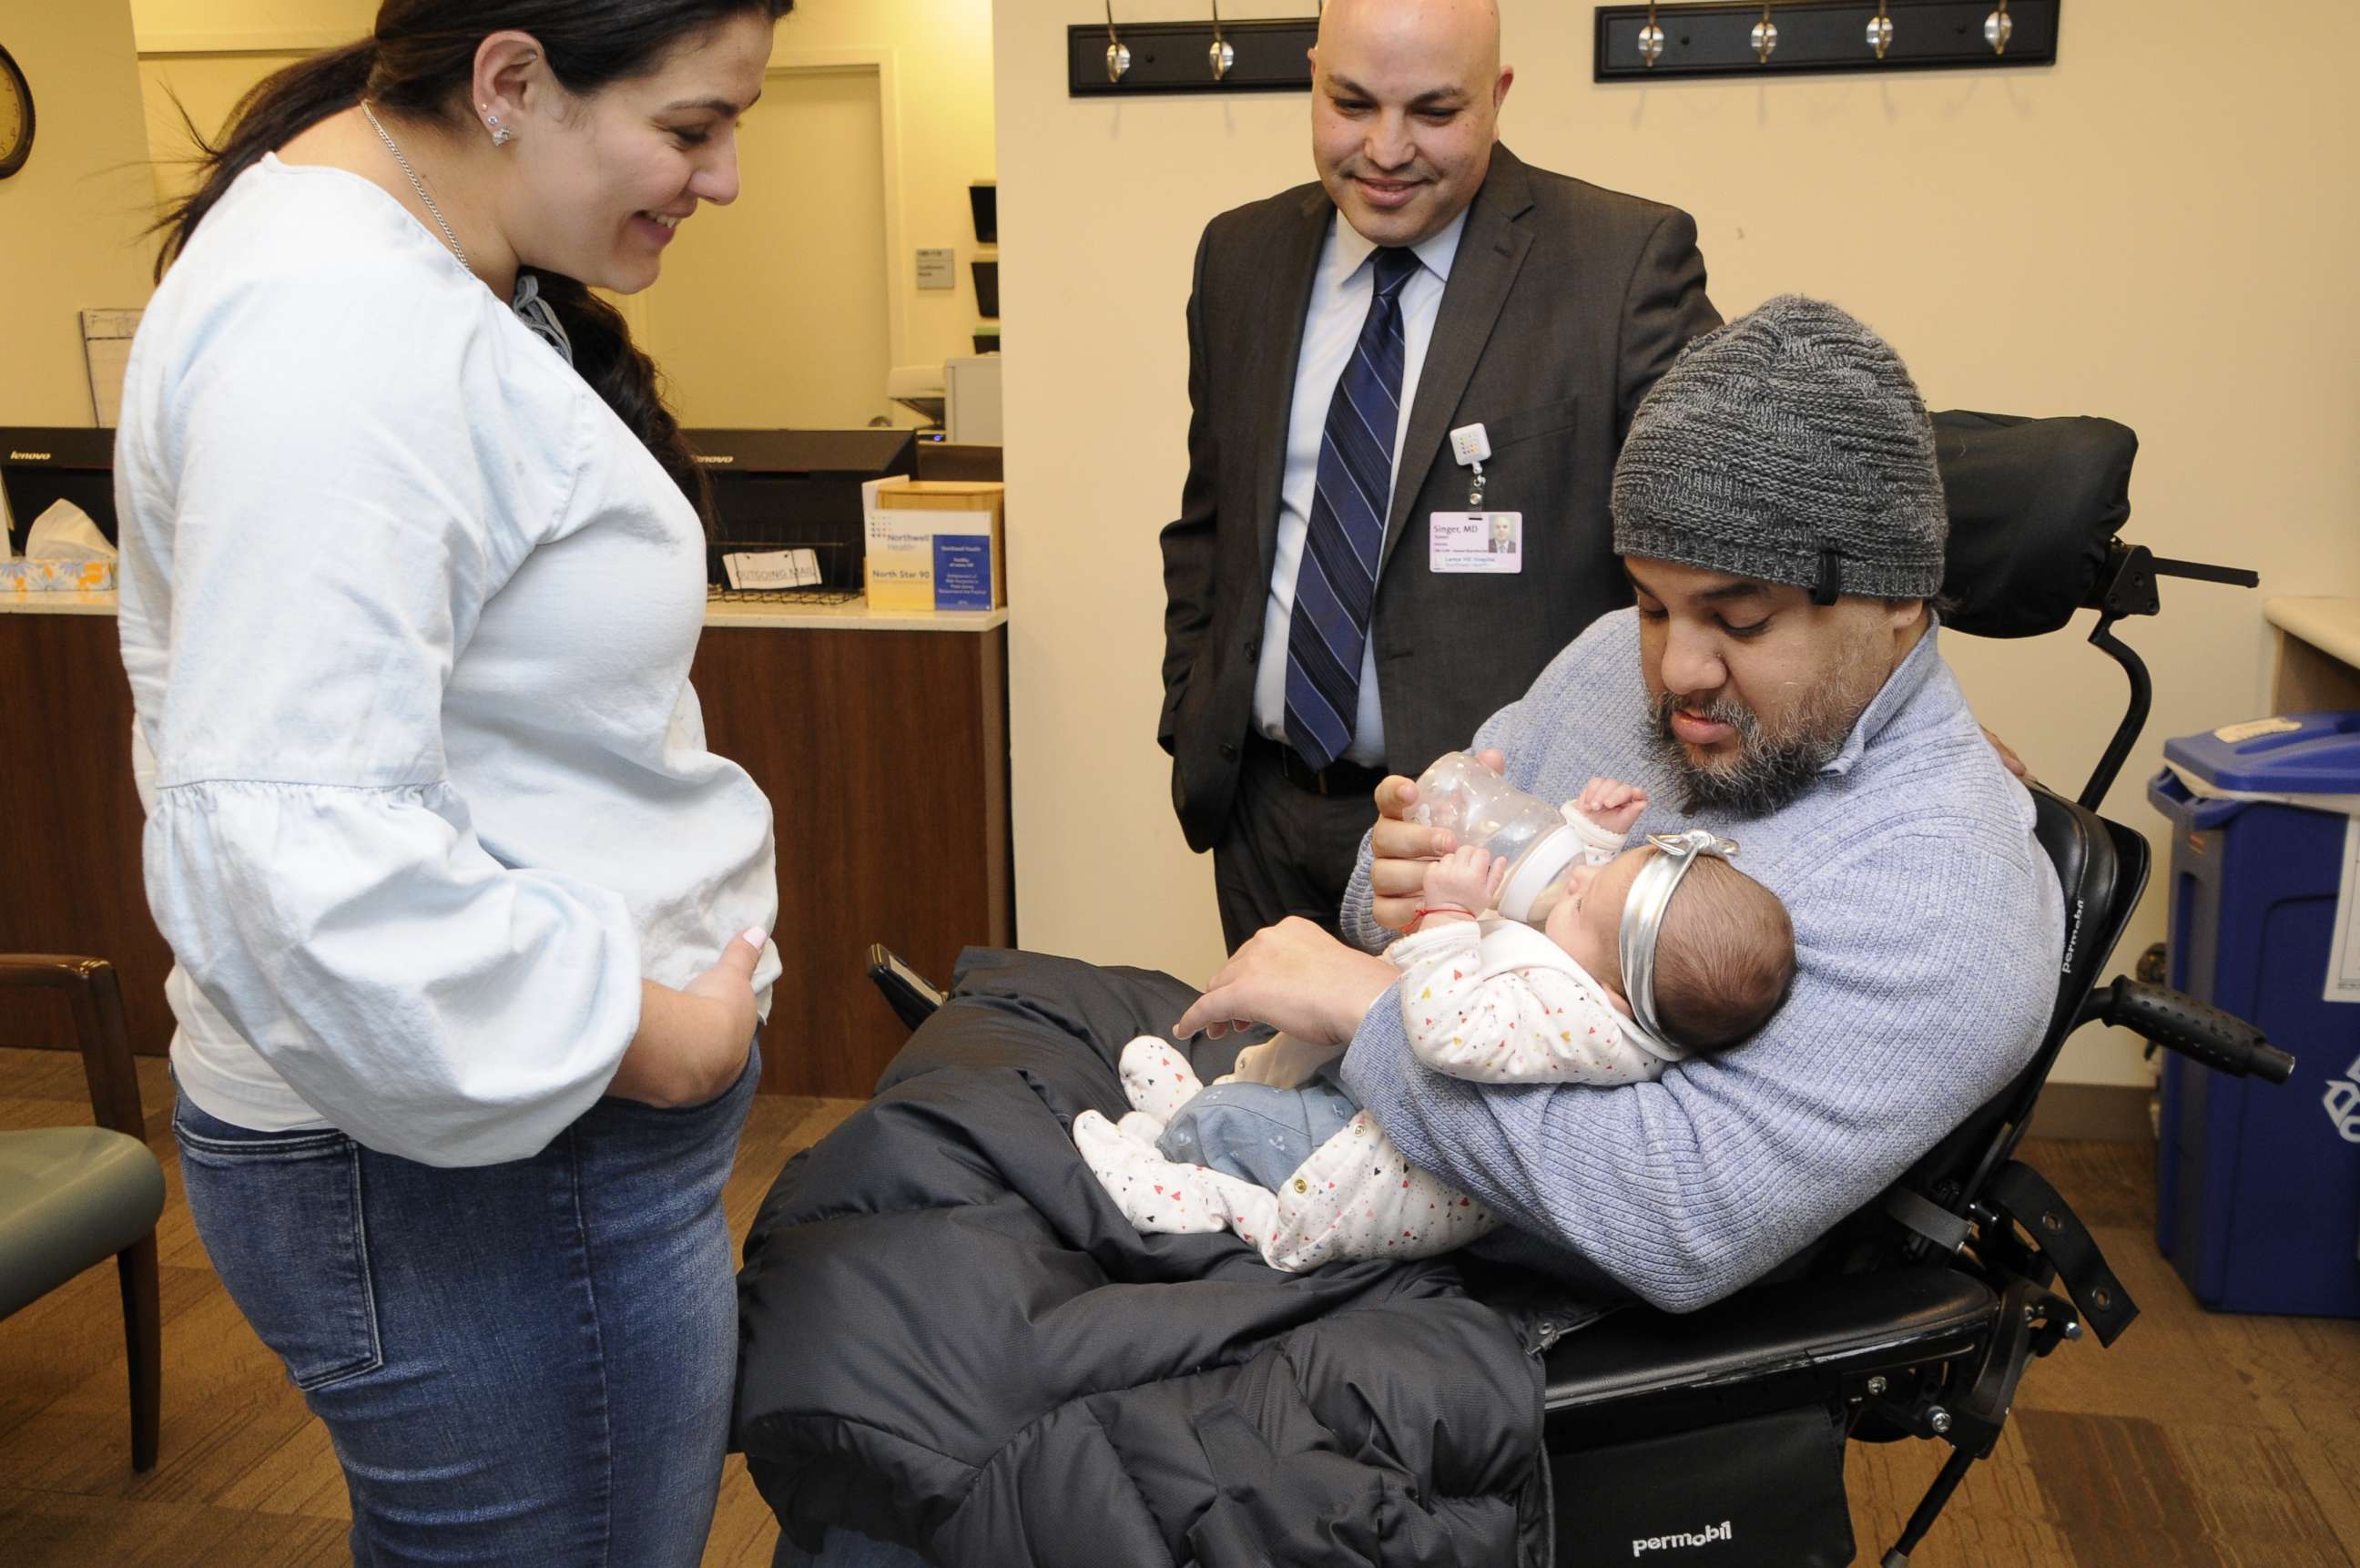 PHOTO: Visnu Gonzalez and Sahily Machado pose with their daughter. Lia, and Dr. Tomer Singer of Lenox Hill Hospital in New York City.